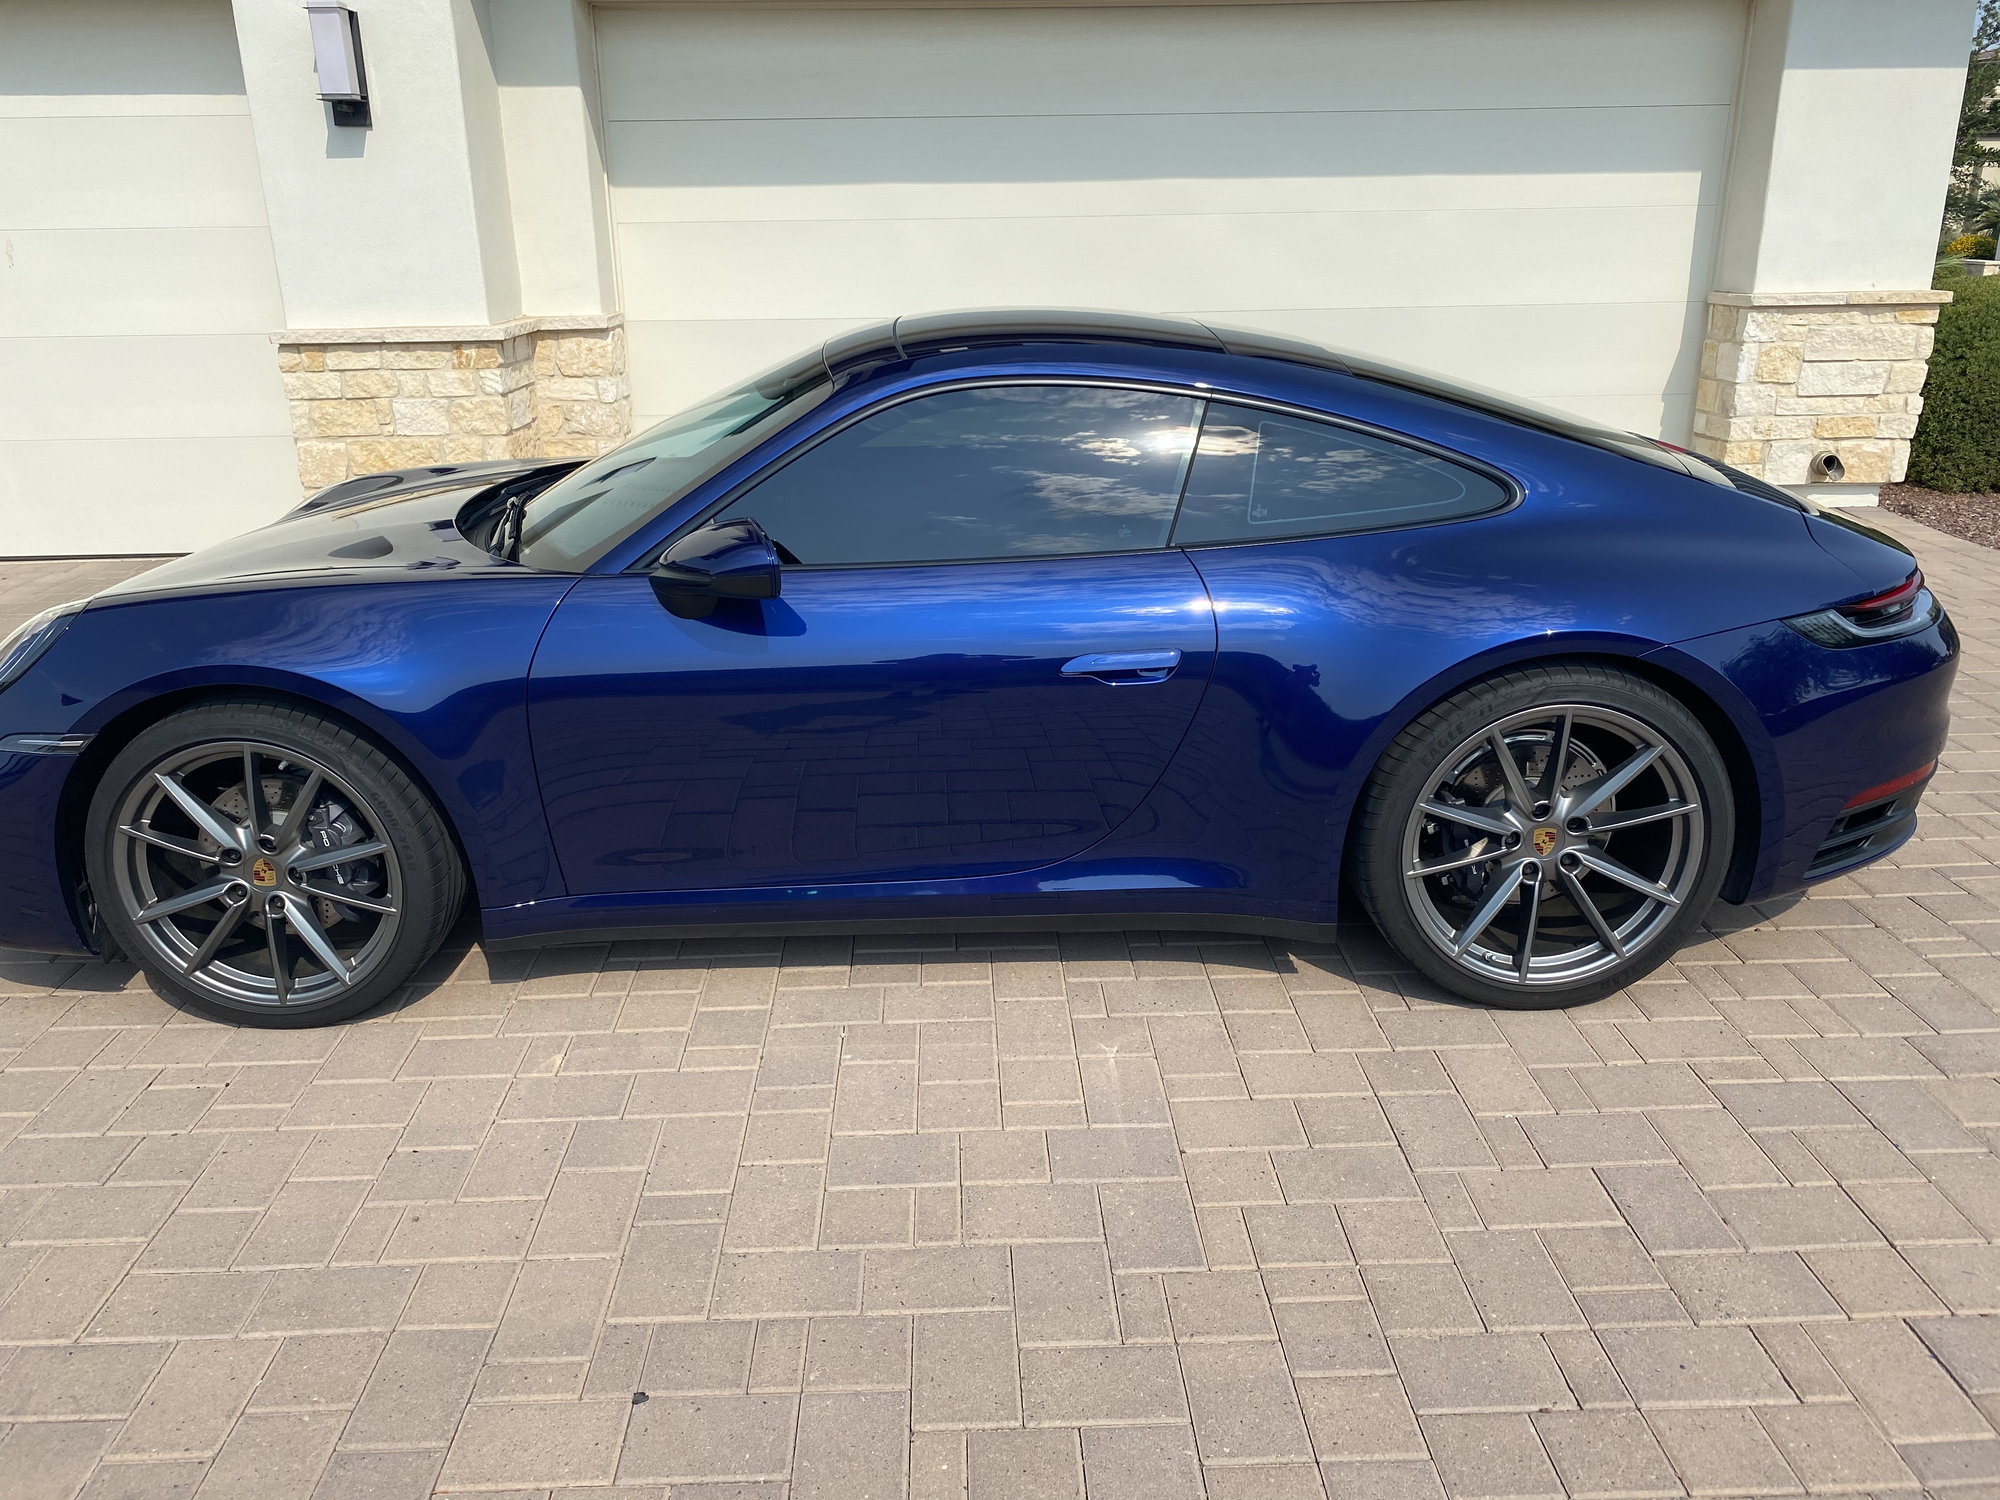 2020 Porsche 911 - 2020 992 Base Carrera Gentian Blue - Used - VIN WP0AA2A99LS205173 - 7,500 Miles - 6 cyl - 2WD - Automatic - Coupe - Blue - Gilbert, AZ 85297, United States